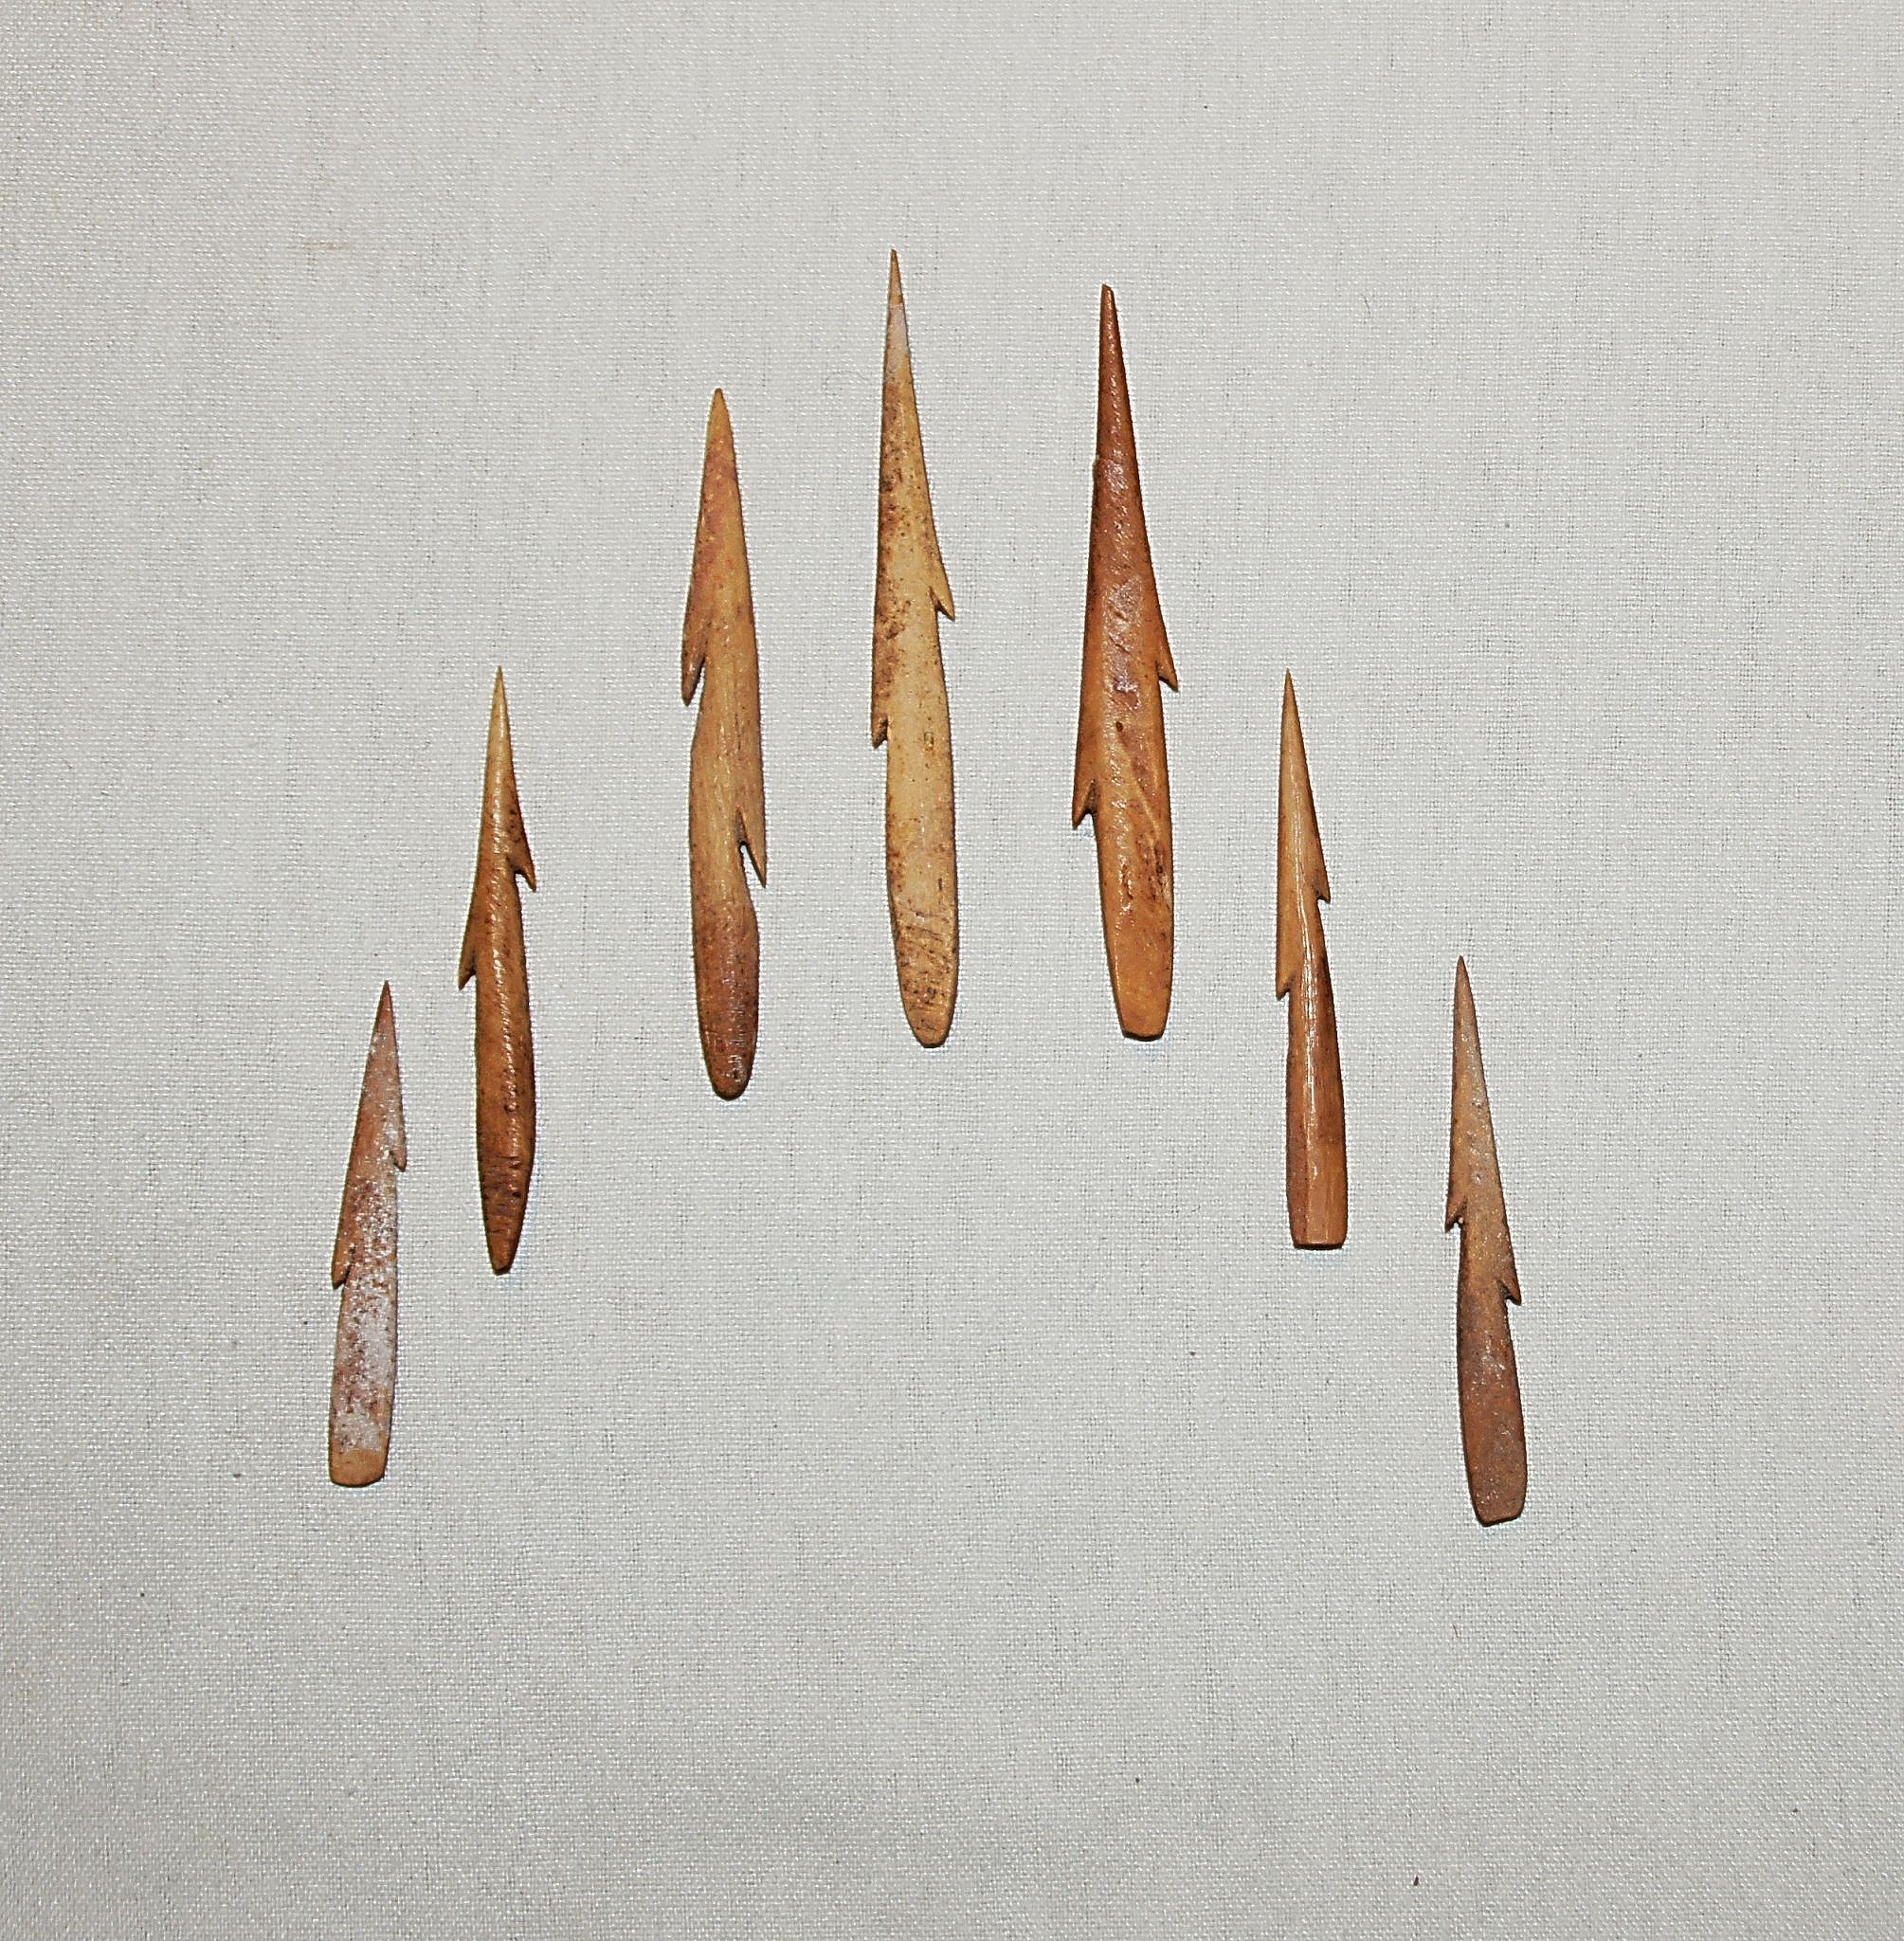 Chile, 7 Bone Carved Barbs for Harpoon
These barbs were fitted to small slender wooden shafts to spear fish.
Media: Bone
Dimensions: Length:  2” – 3.5”
N6020